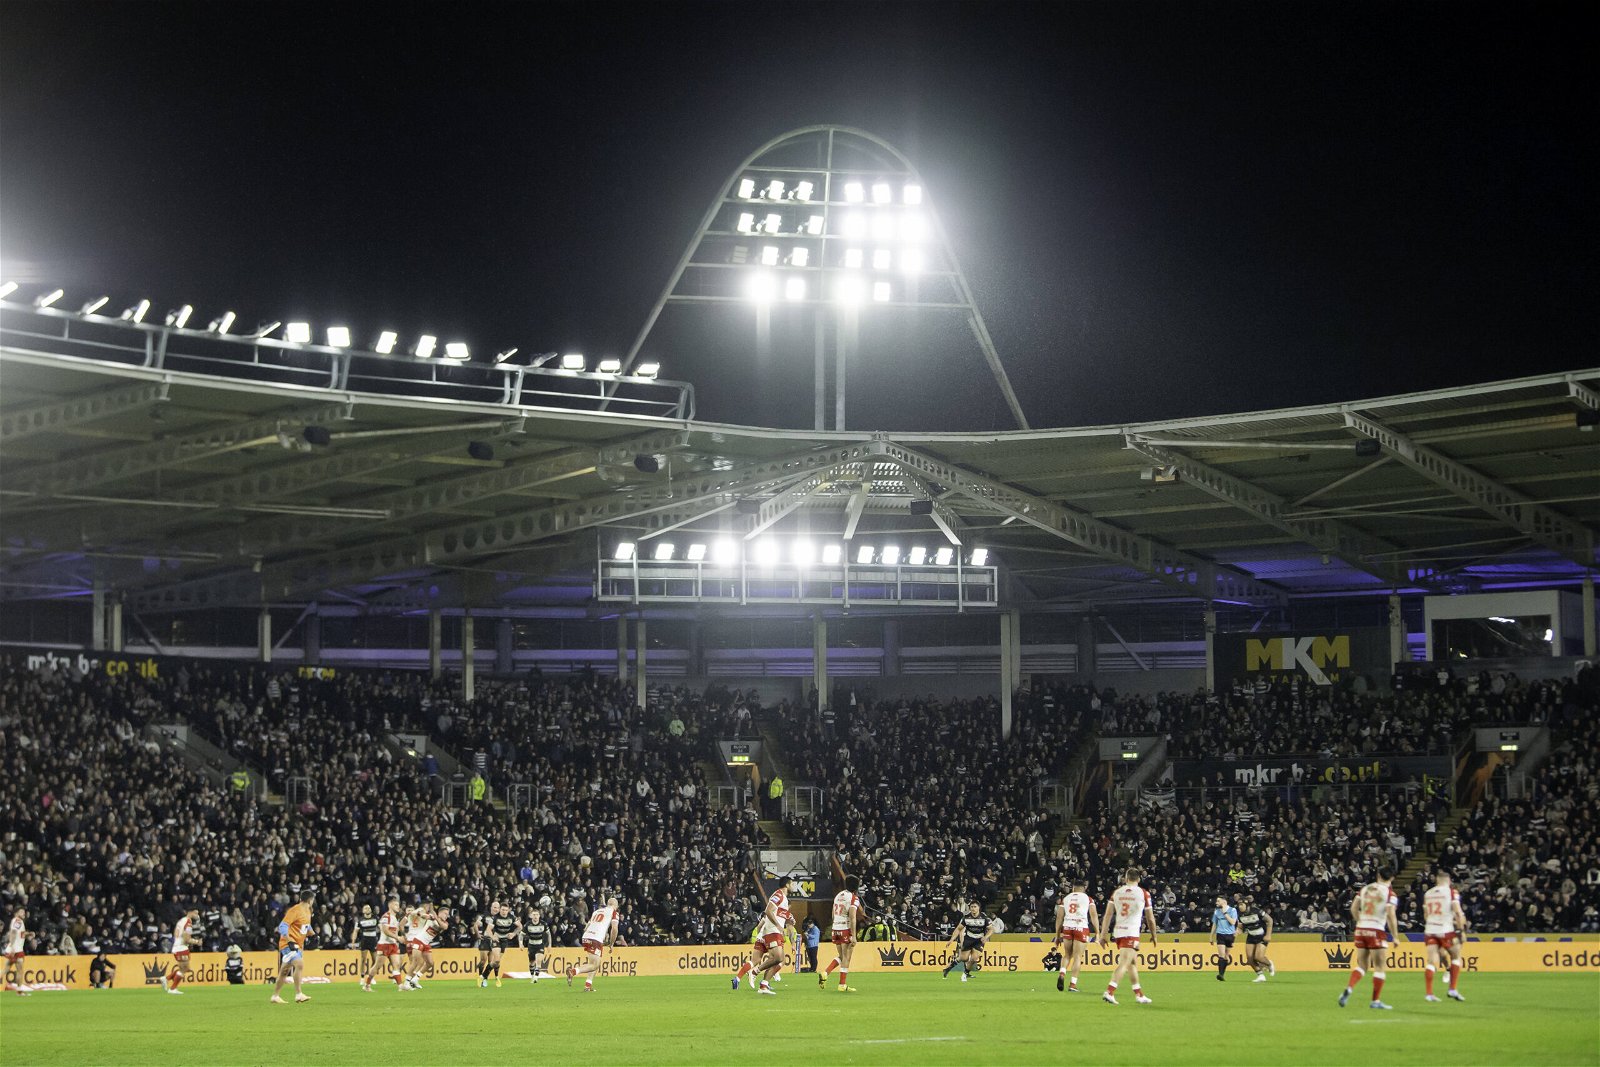 A view from a corner of MKM Stadium, Hull, during Hull FC vs Hull KR in Round One of Super League 2-24. The stands are full.